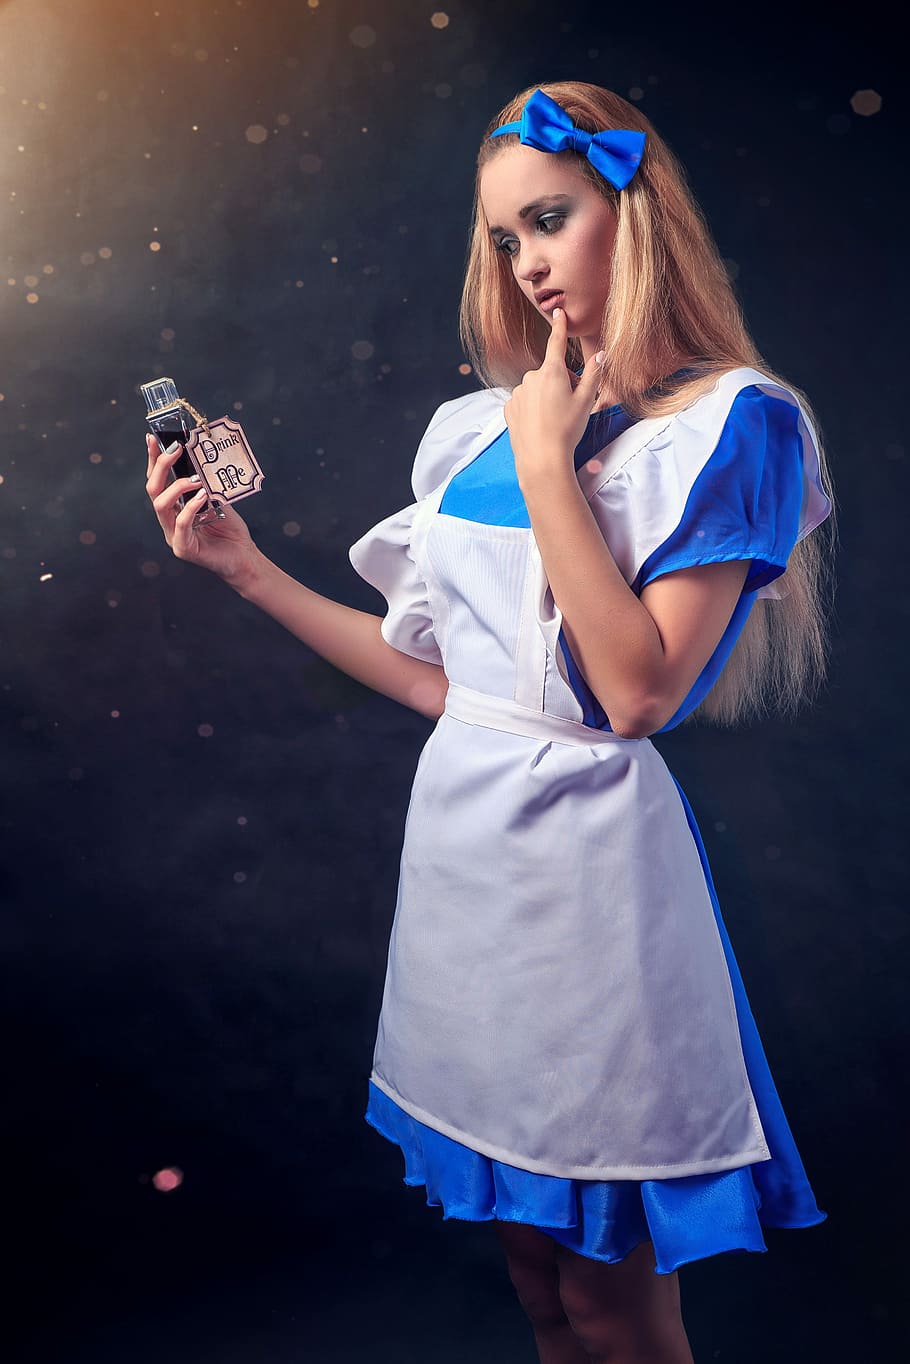 woman, wearing, alice, wonderland dress, holding, glass bottle, young, girl, lovely, charm